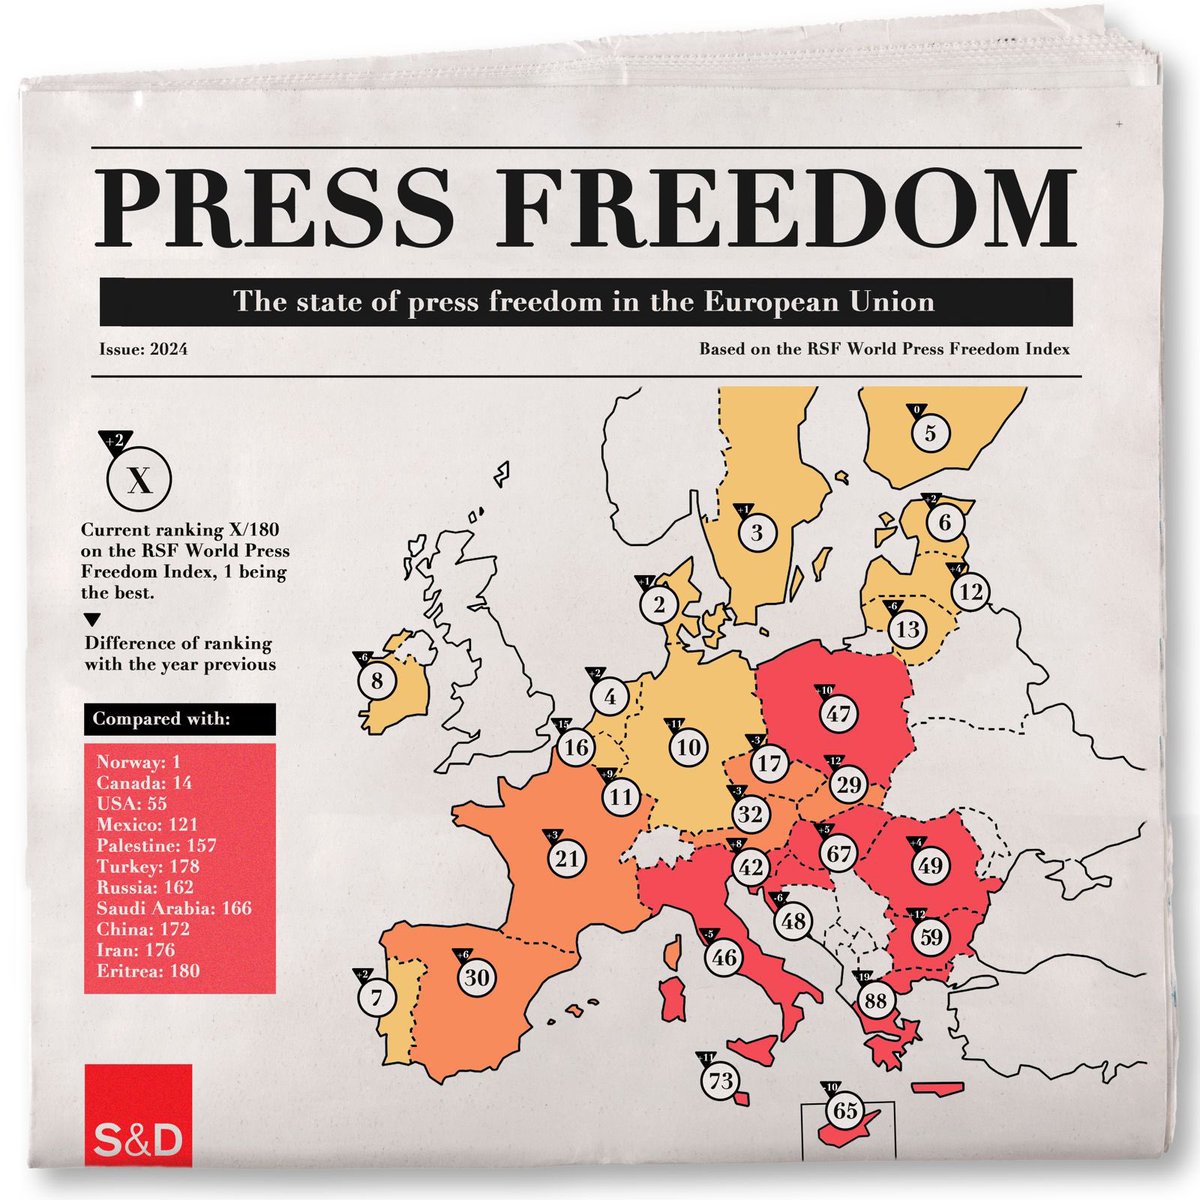 There can be no healthy democracy without a free press. On World Press Freedom Day, here’s the state of play. There’s a lot to do!